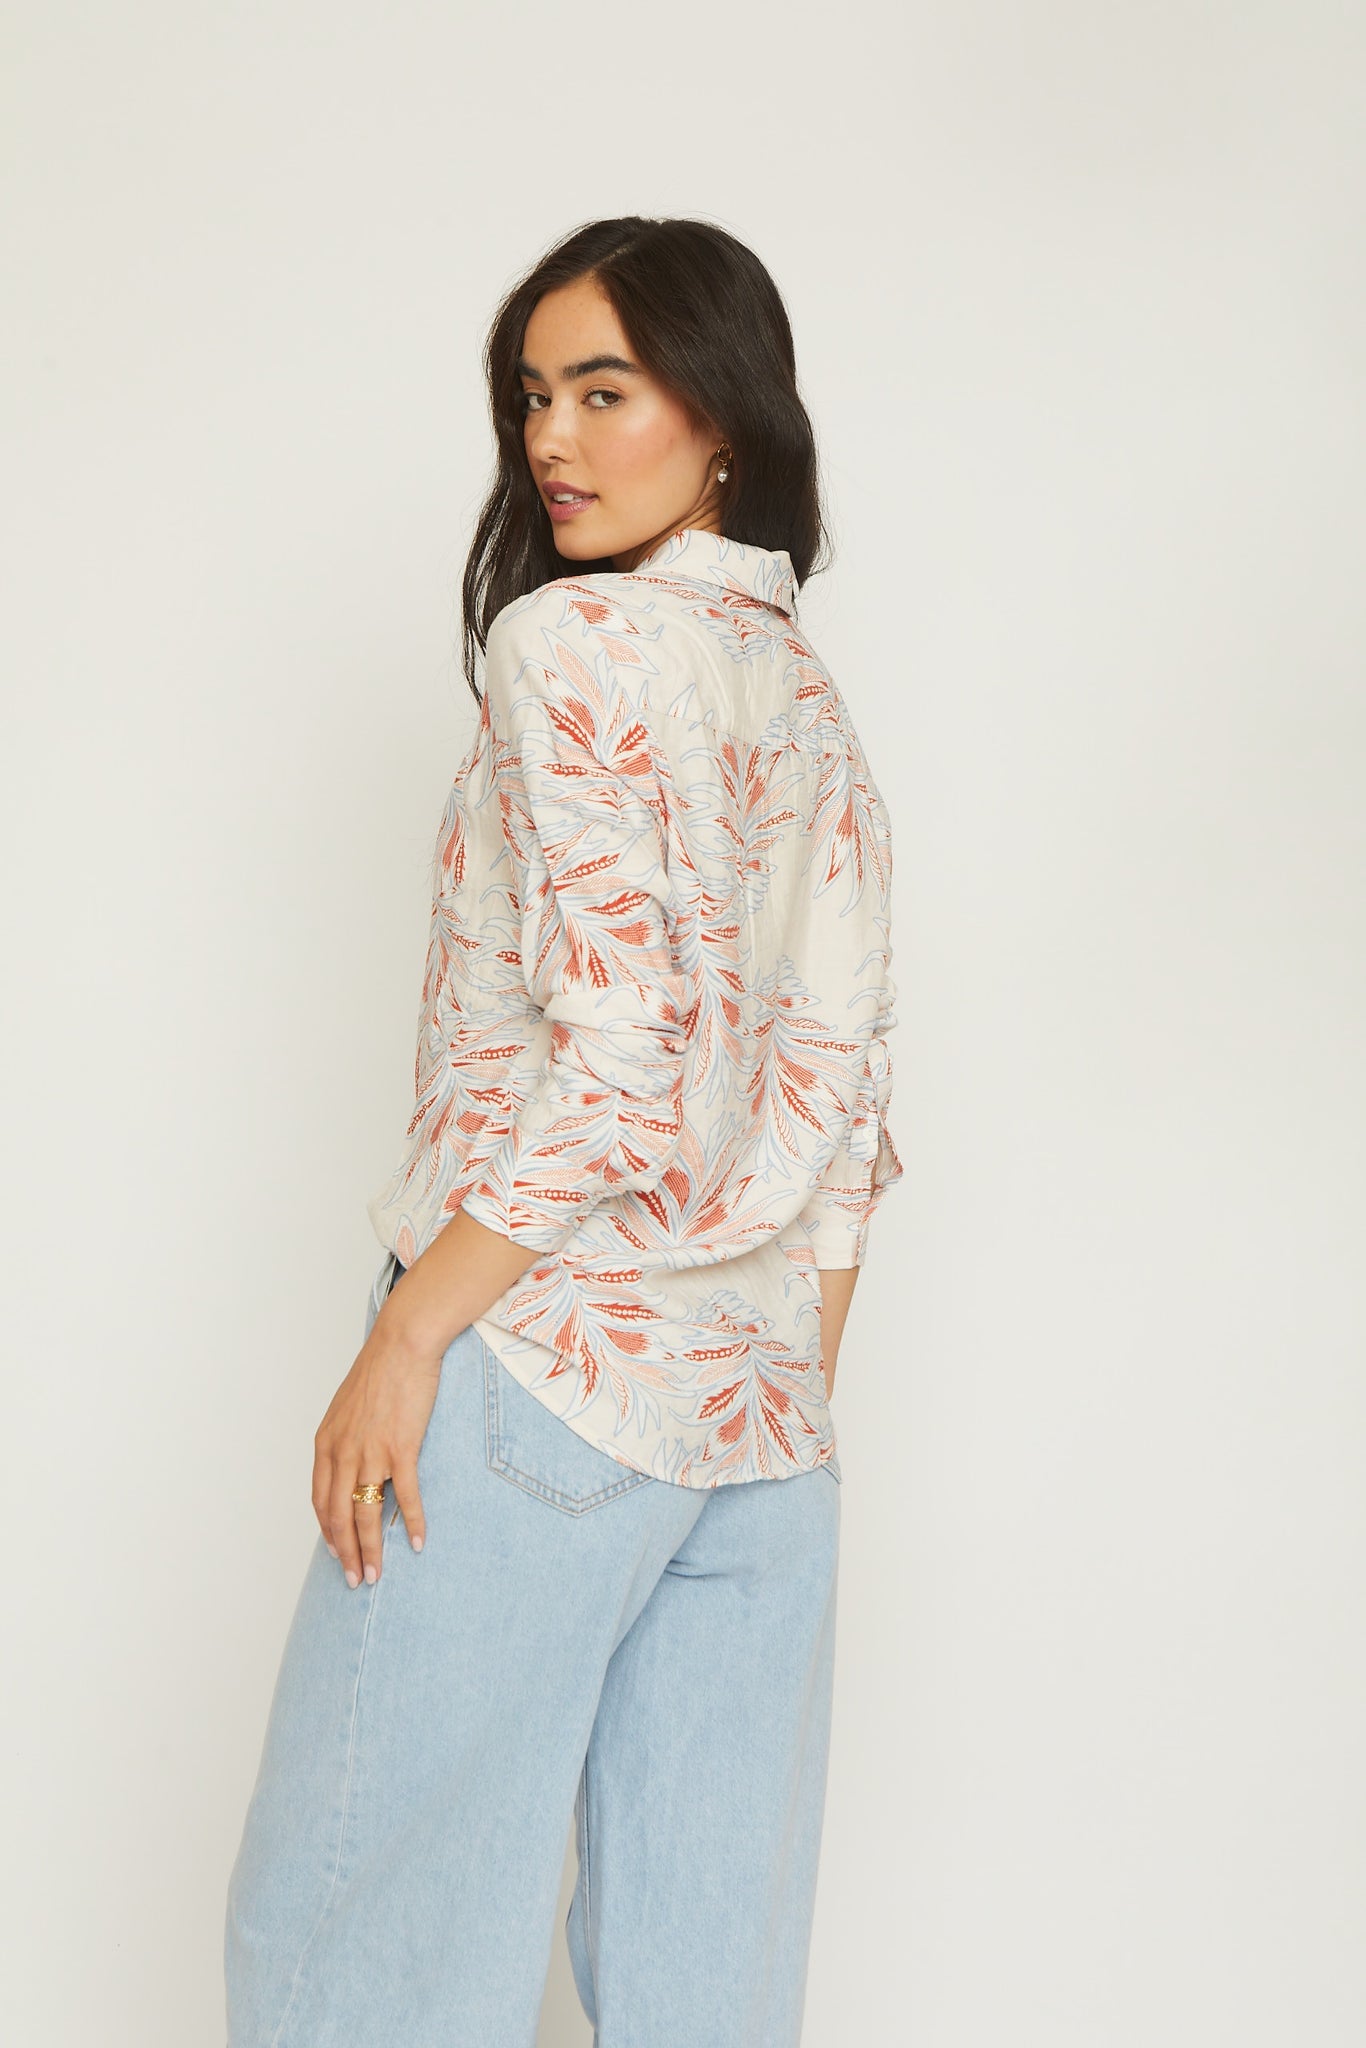 Floral Printed Spring Long Sleeve Button Down White with Red and Blue Floral Design